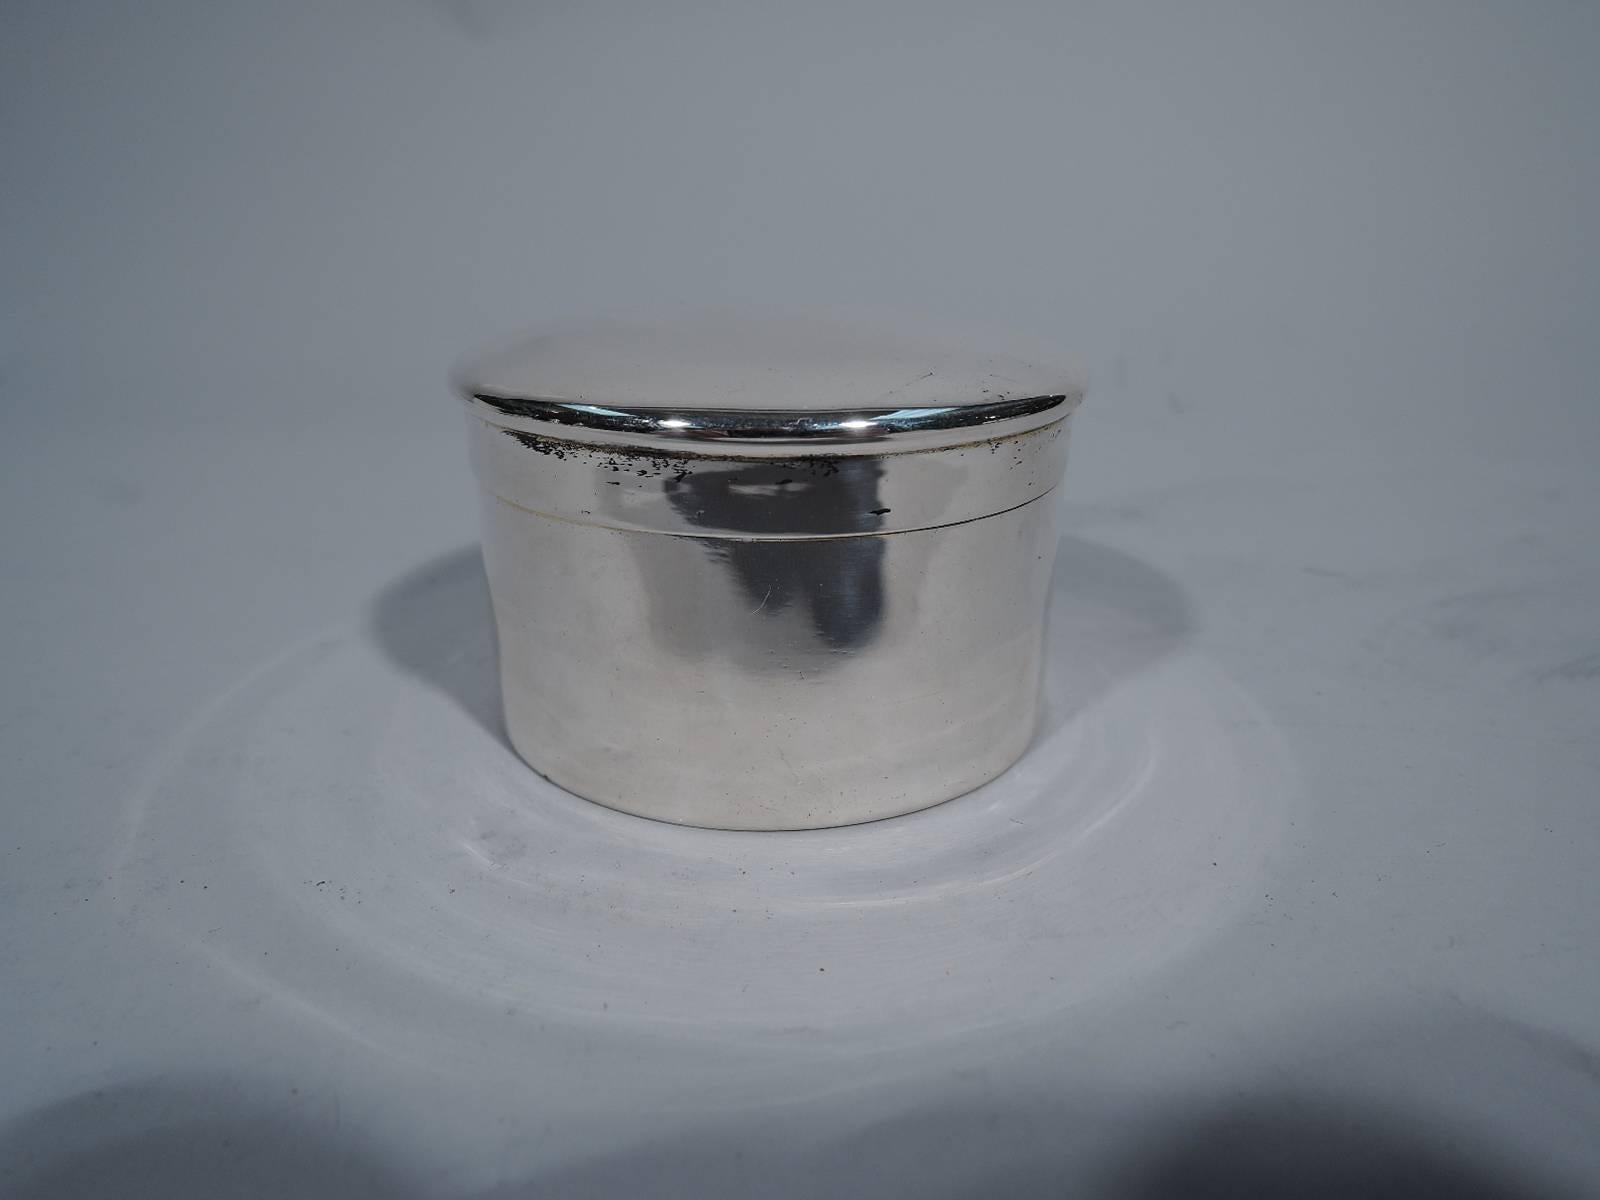 Smart sterling silver trinket box. Made by Tiffany & Co. in New York, circa 1902. Round with straight sides. Cover has slightly curved and overhanging top. Box and cover interior gilt. Hallmark includes pattern no. 8856 (first produced in 1885) and